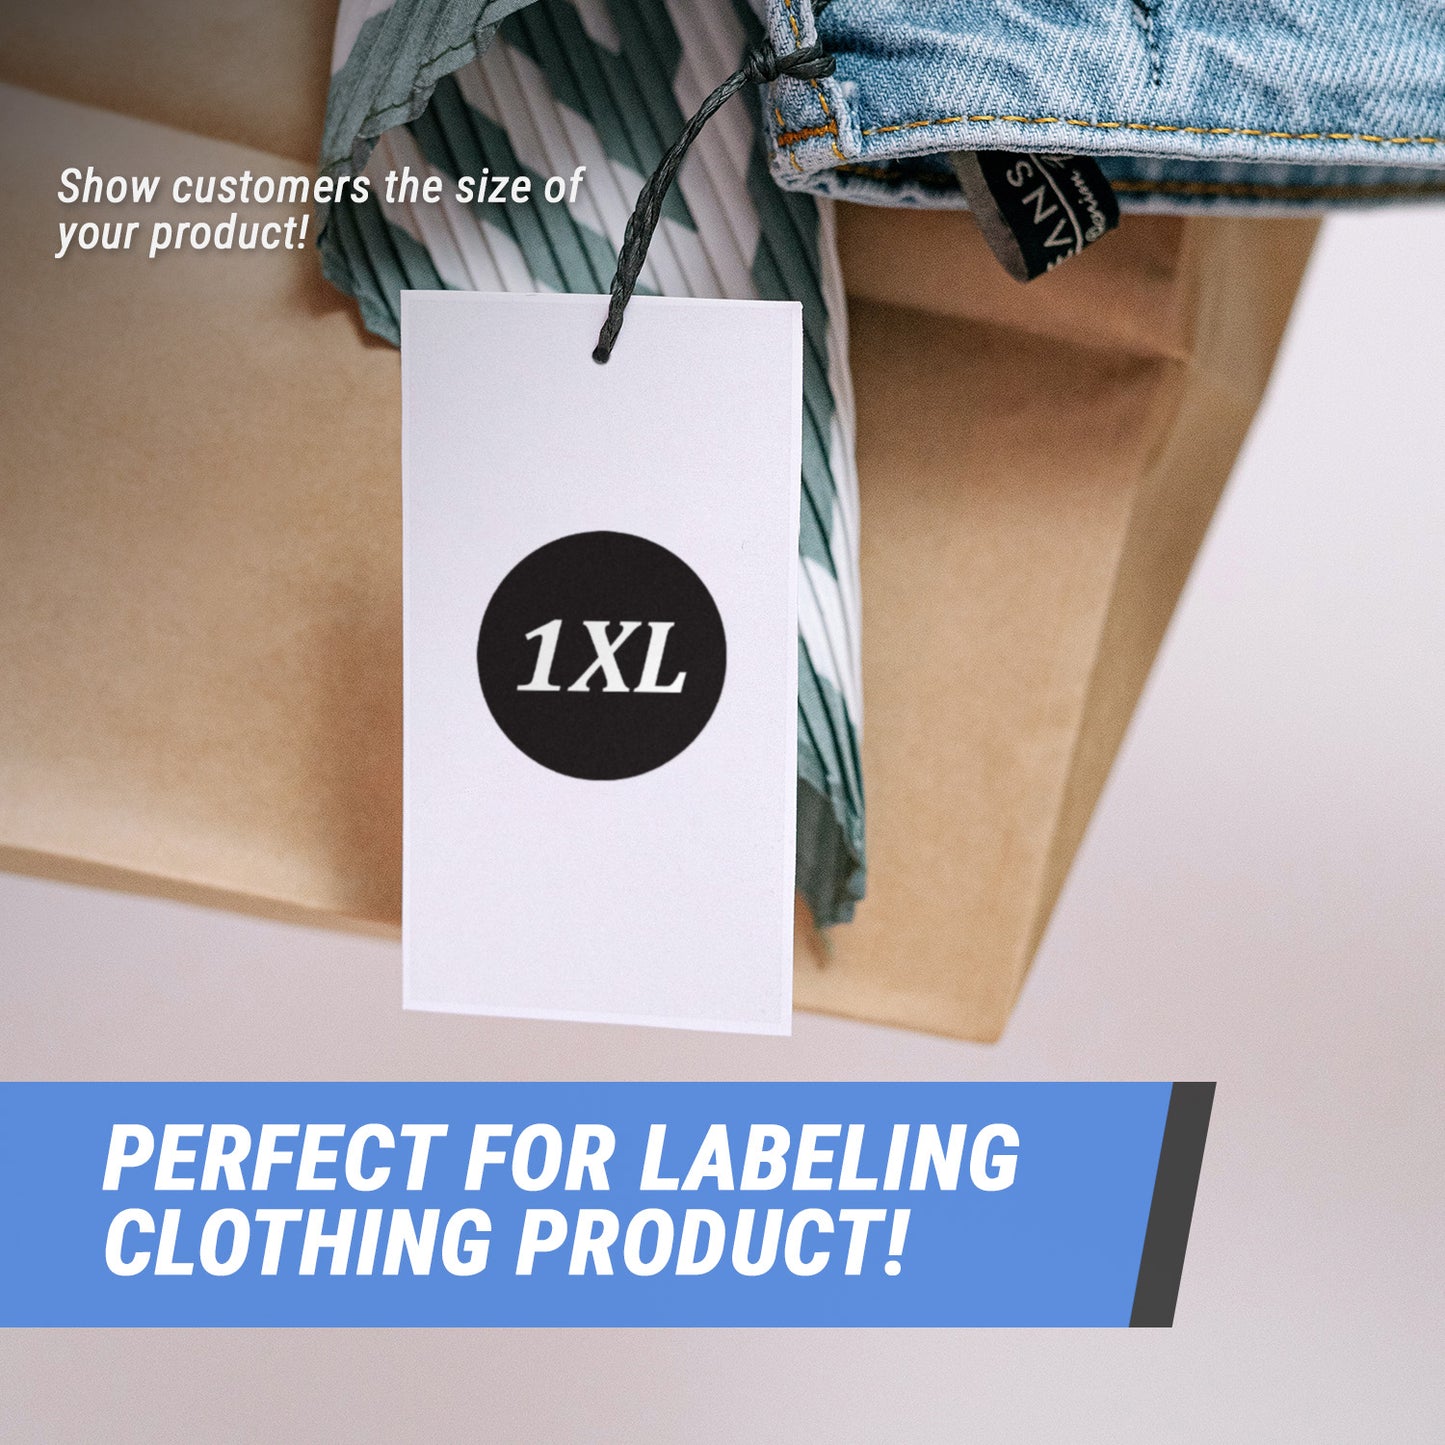 1.25 inch | Shoe & Clothing Size: (1XL) X-Large Stickers